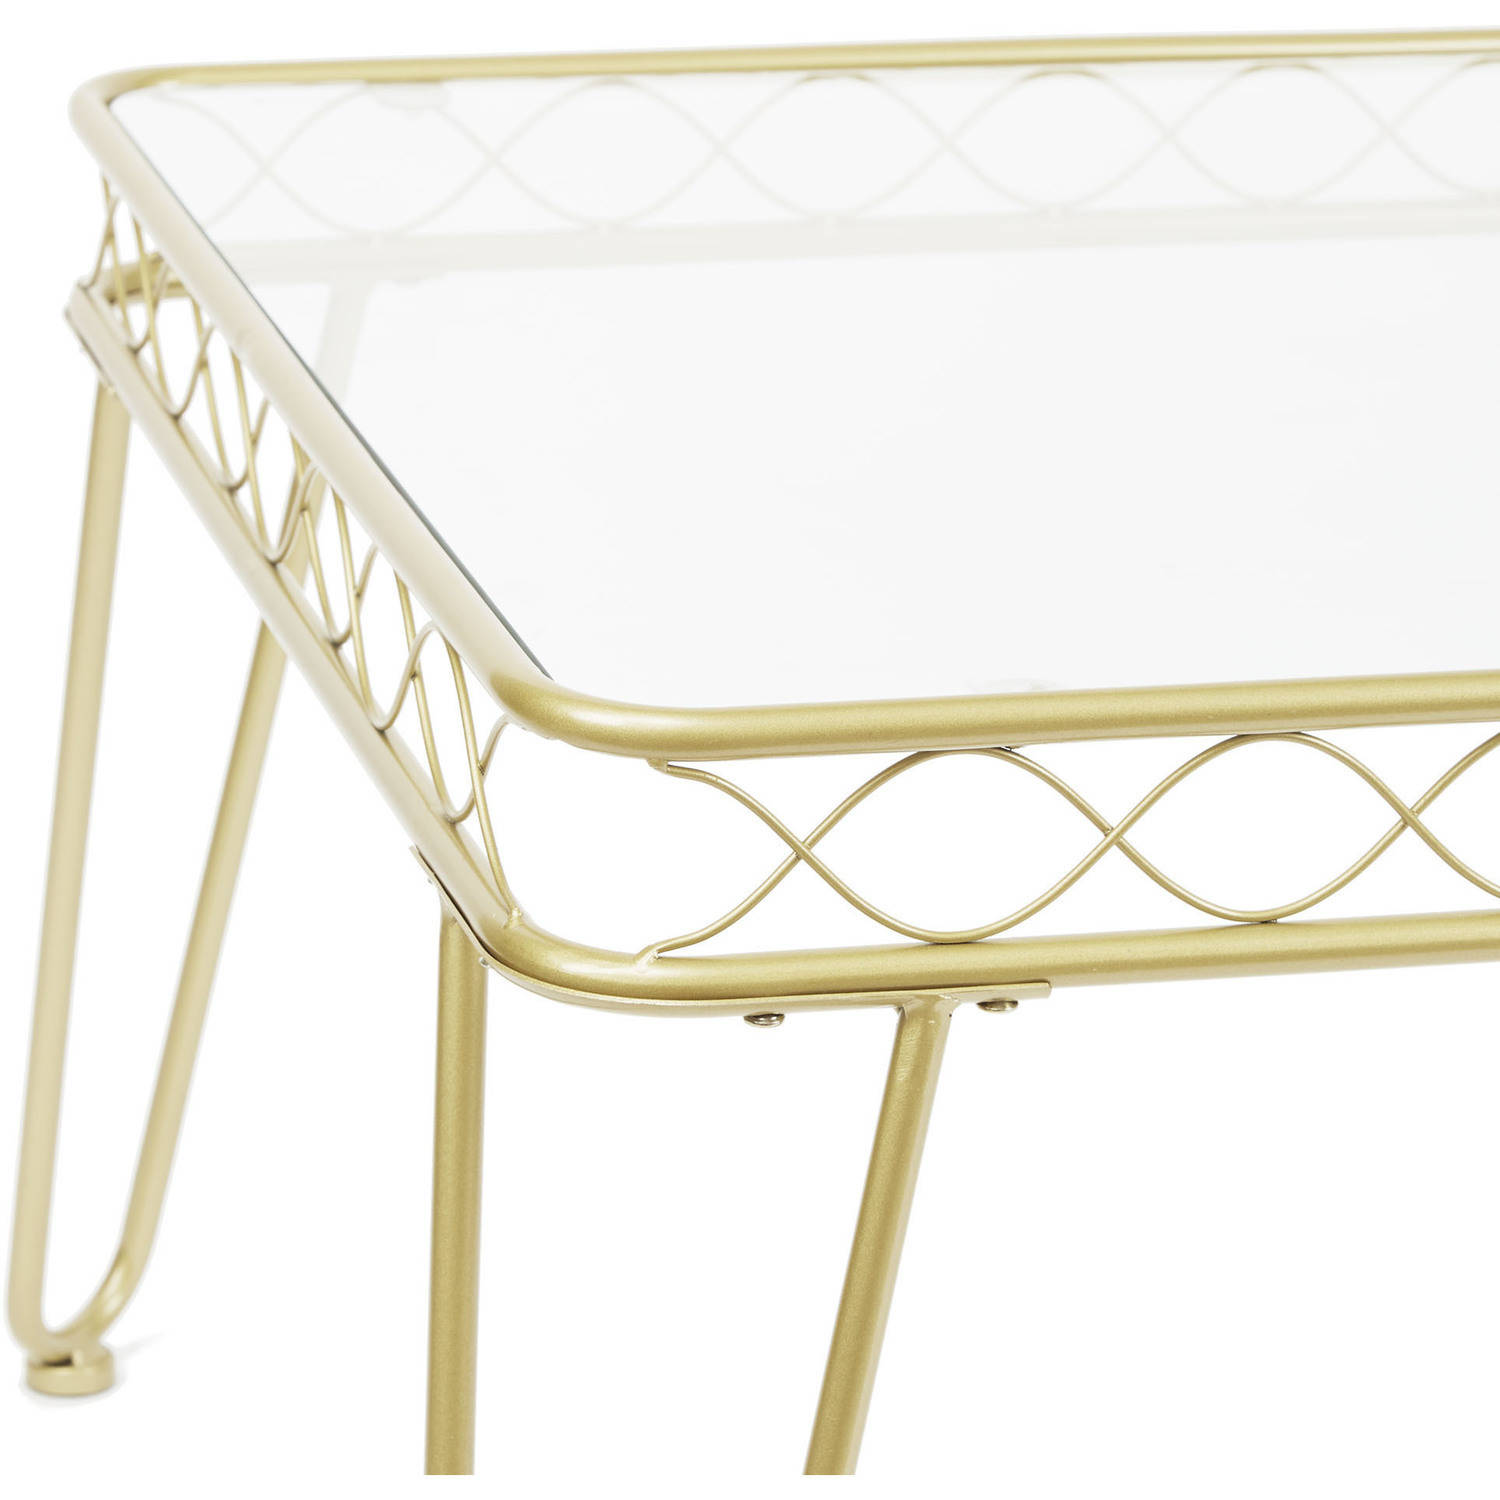 Better Homes & Gardens Mirabella Coffee Table - image 2 of 3